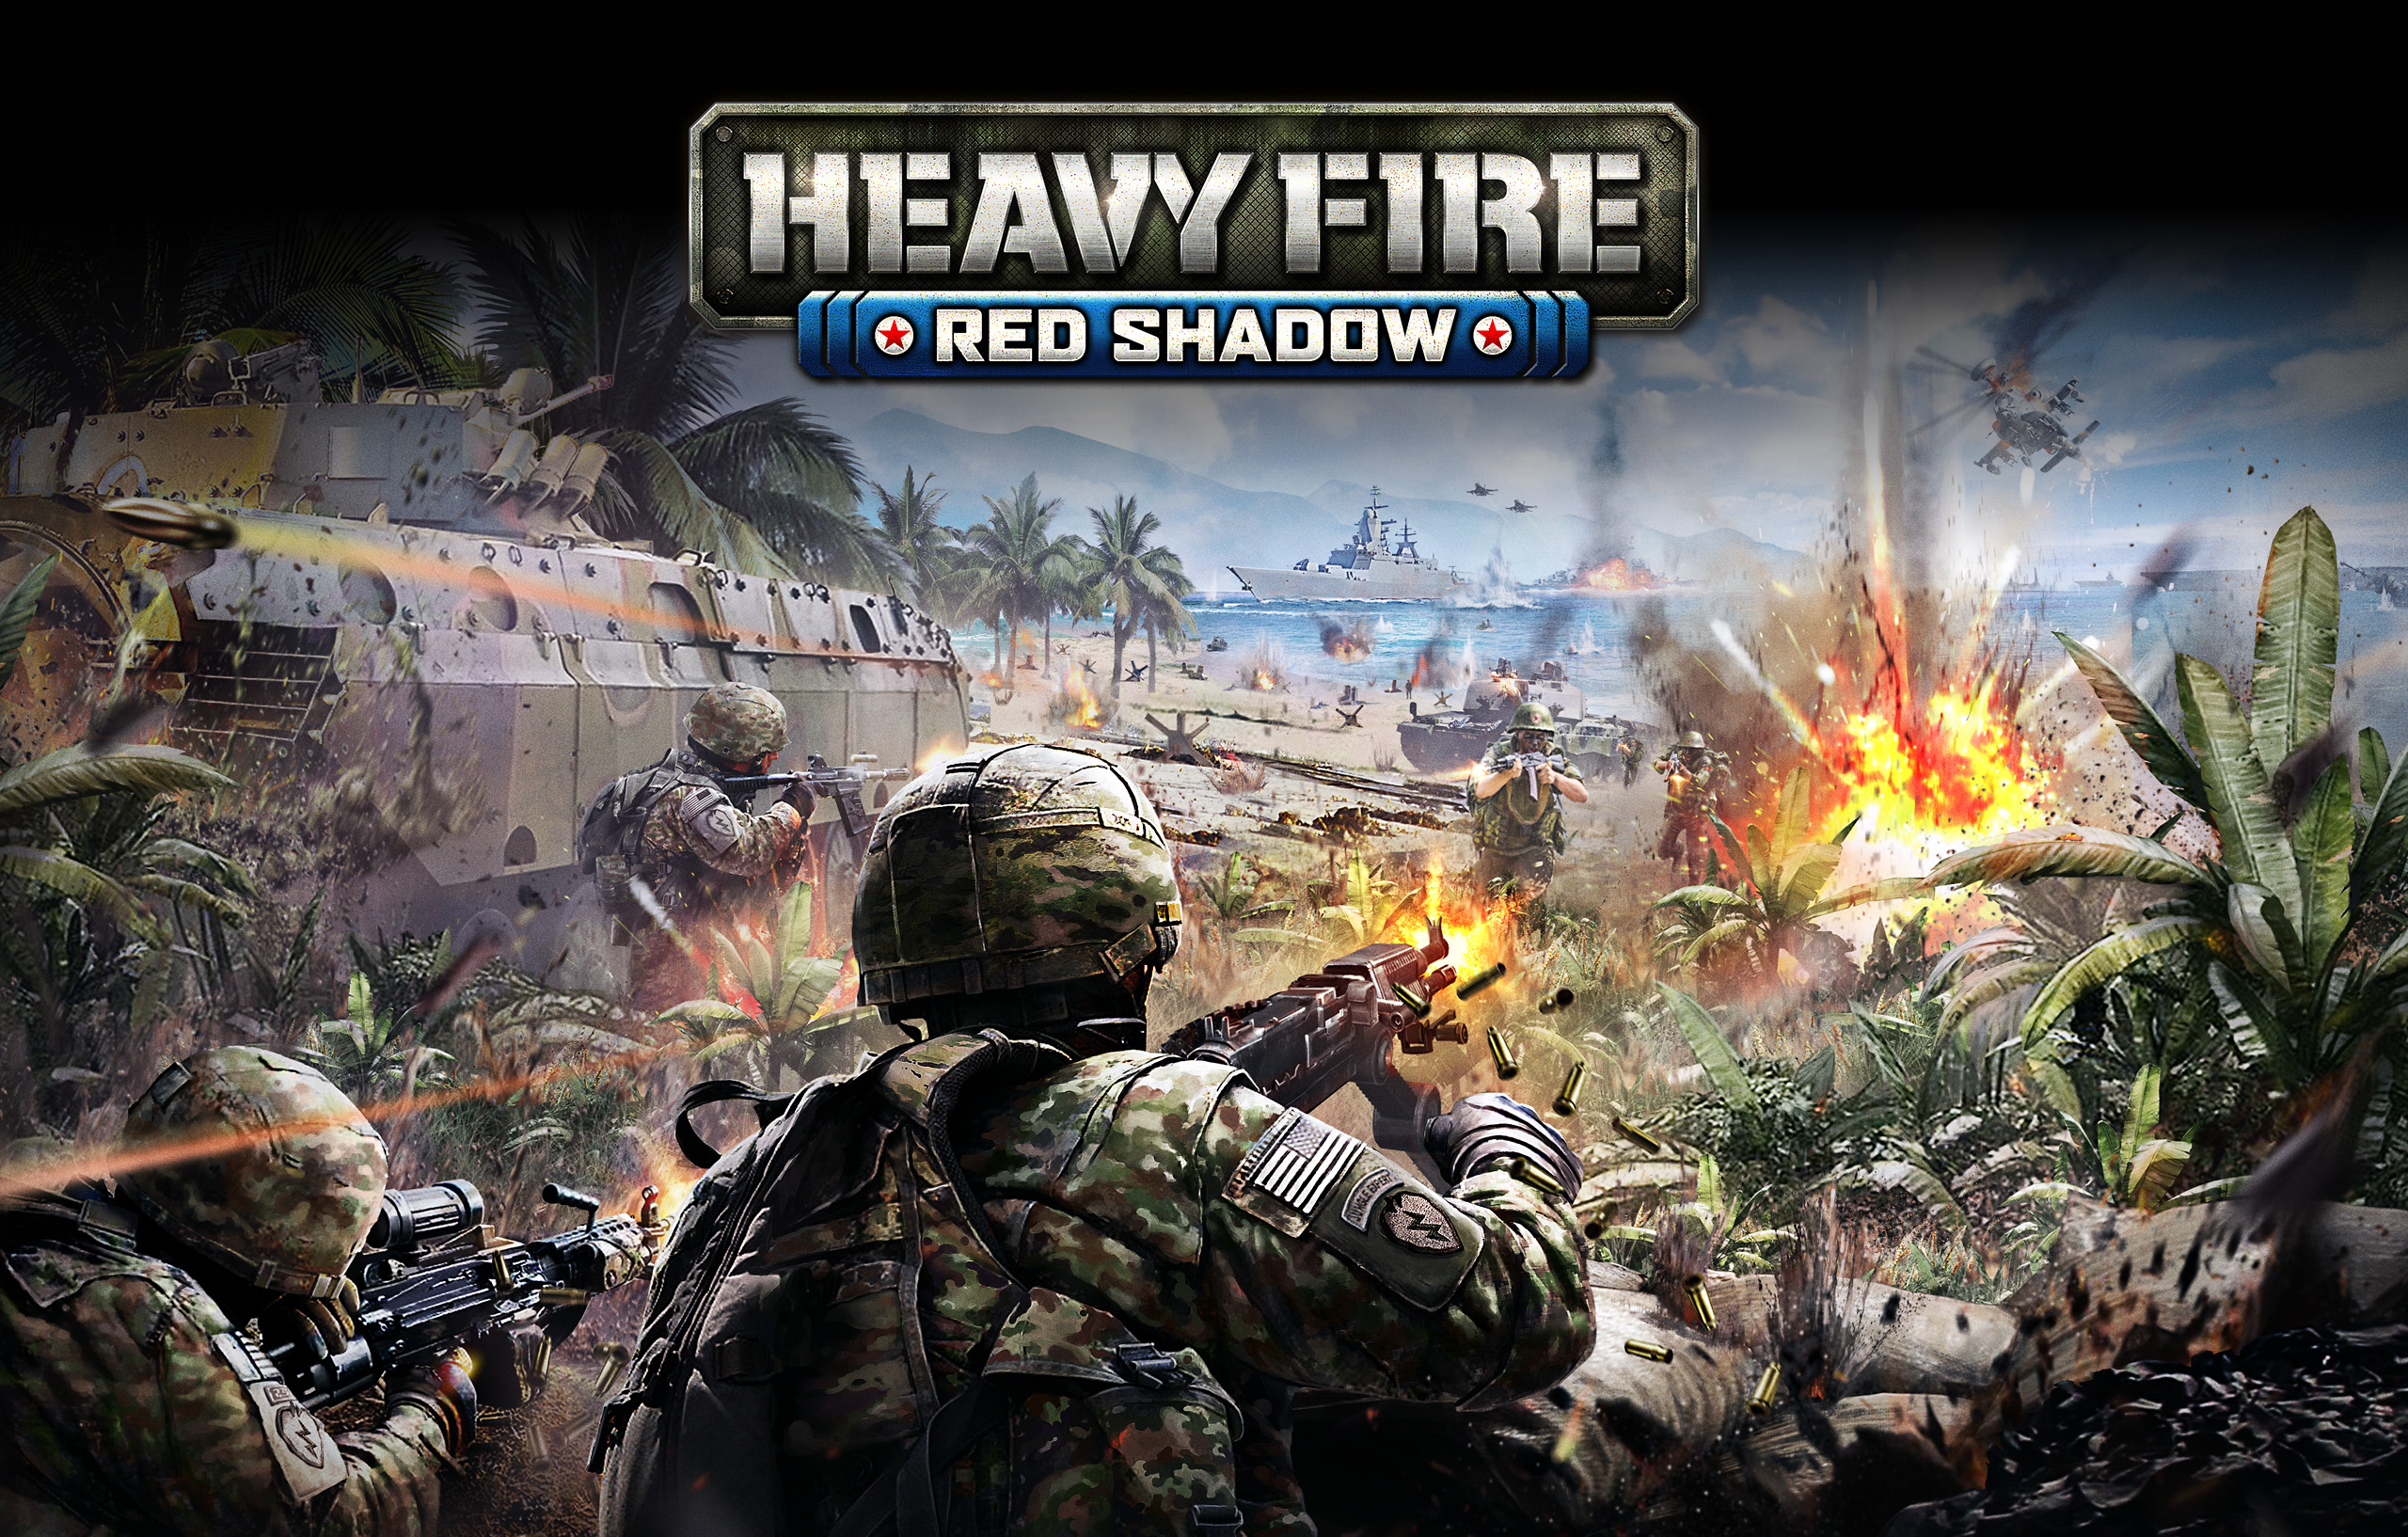 NEWS – Heavy Fire: Red Shadow gets release date, demo, VR support, and pre-order bonuses